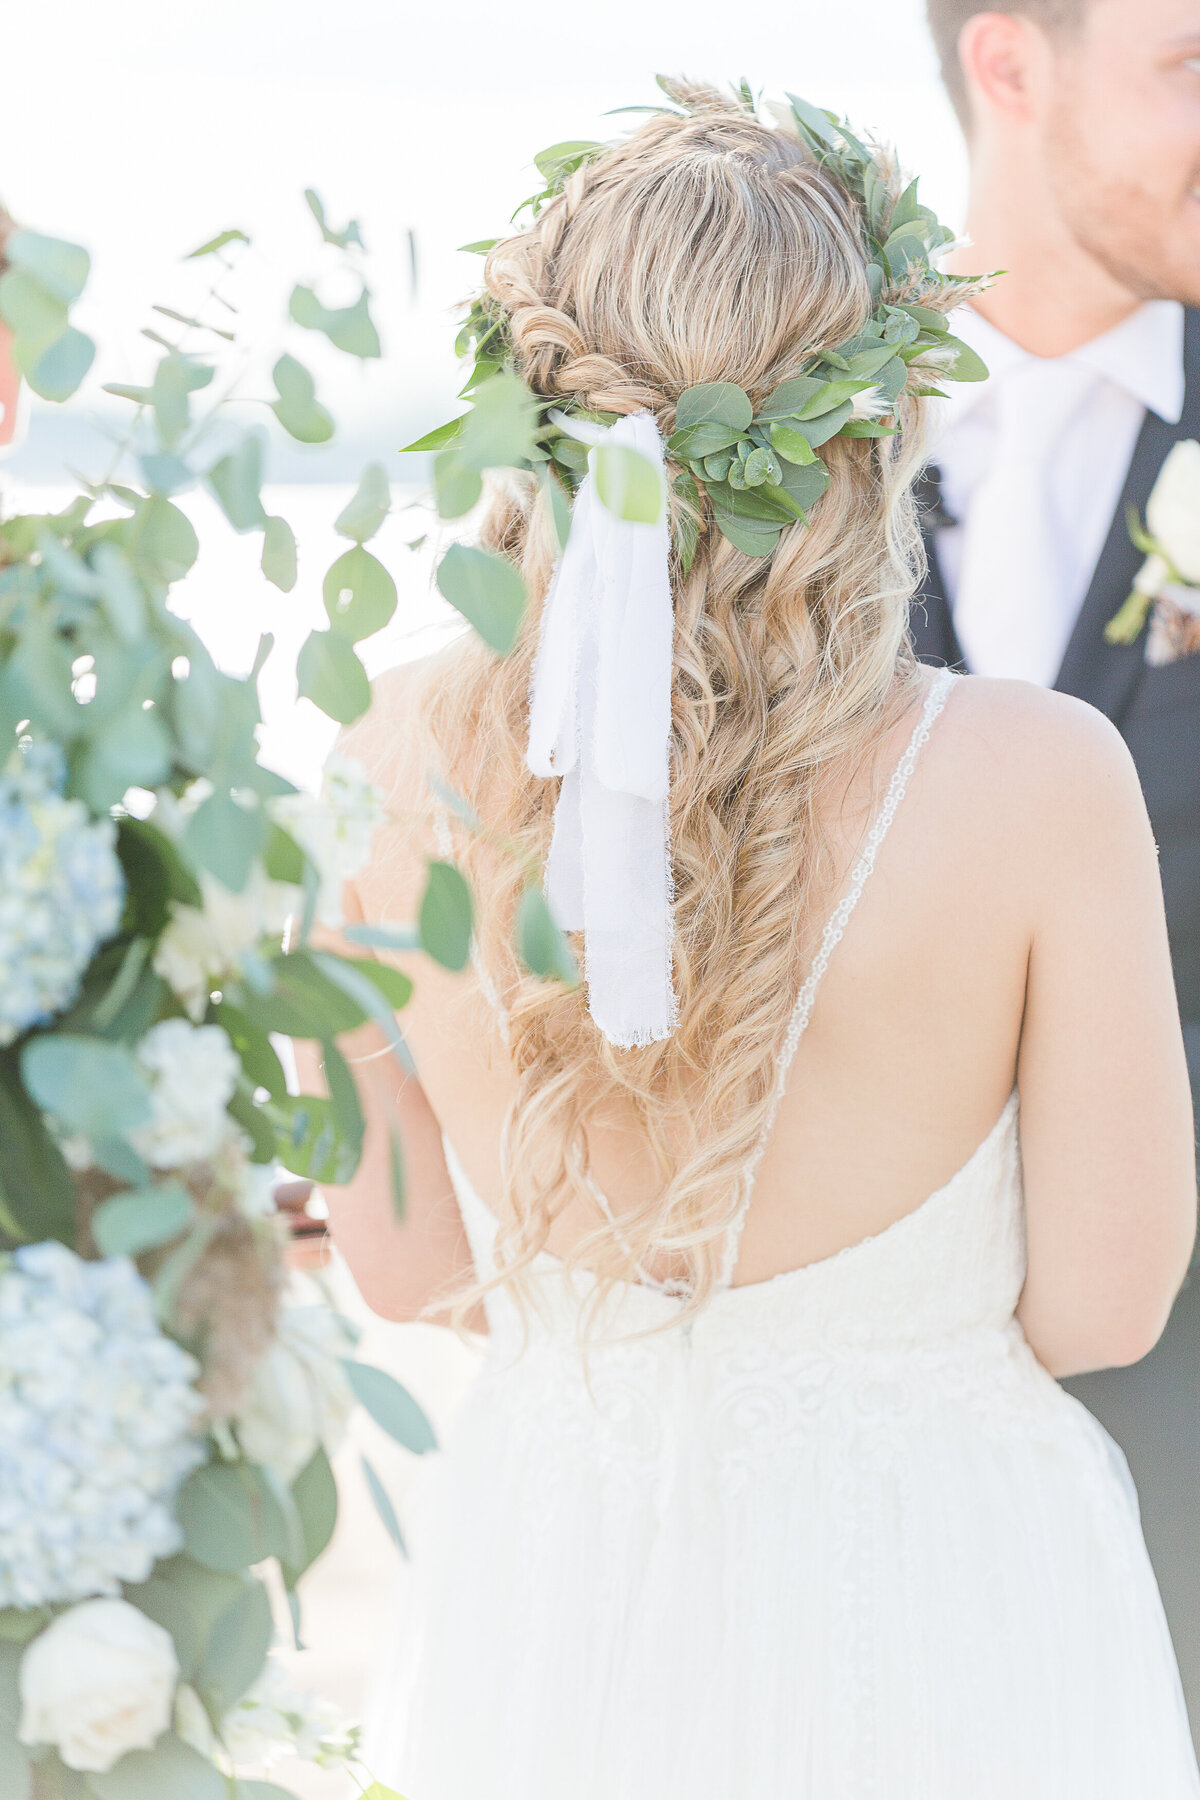 Detail image. The bride's back, hair and floral crown.